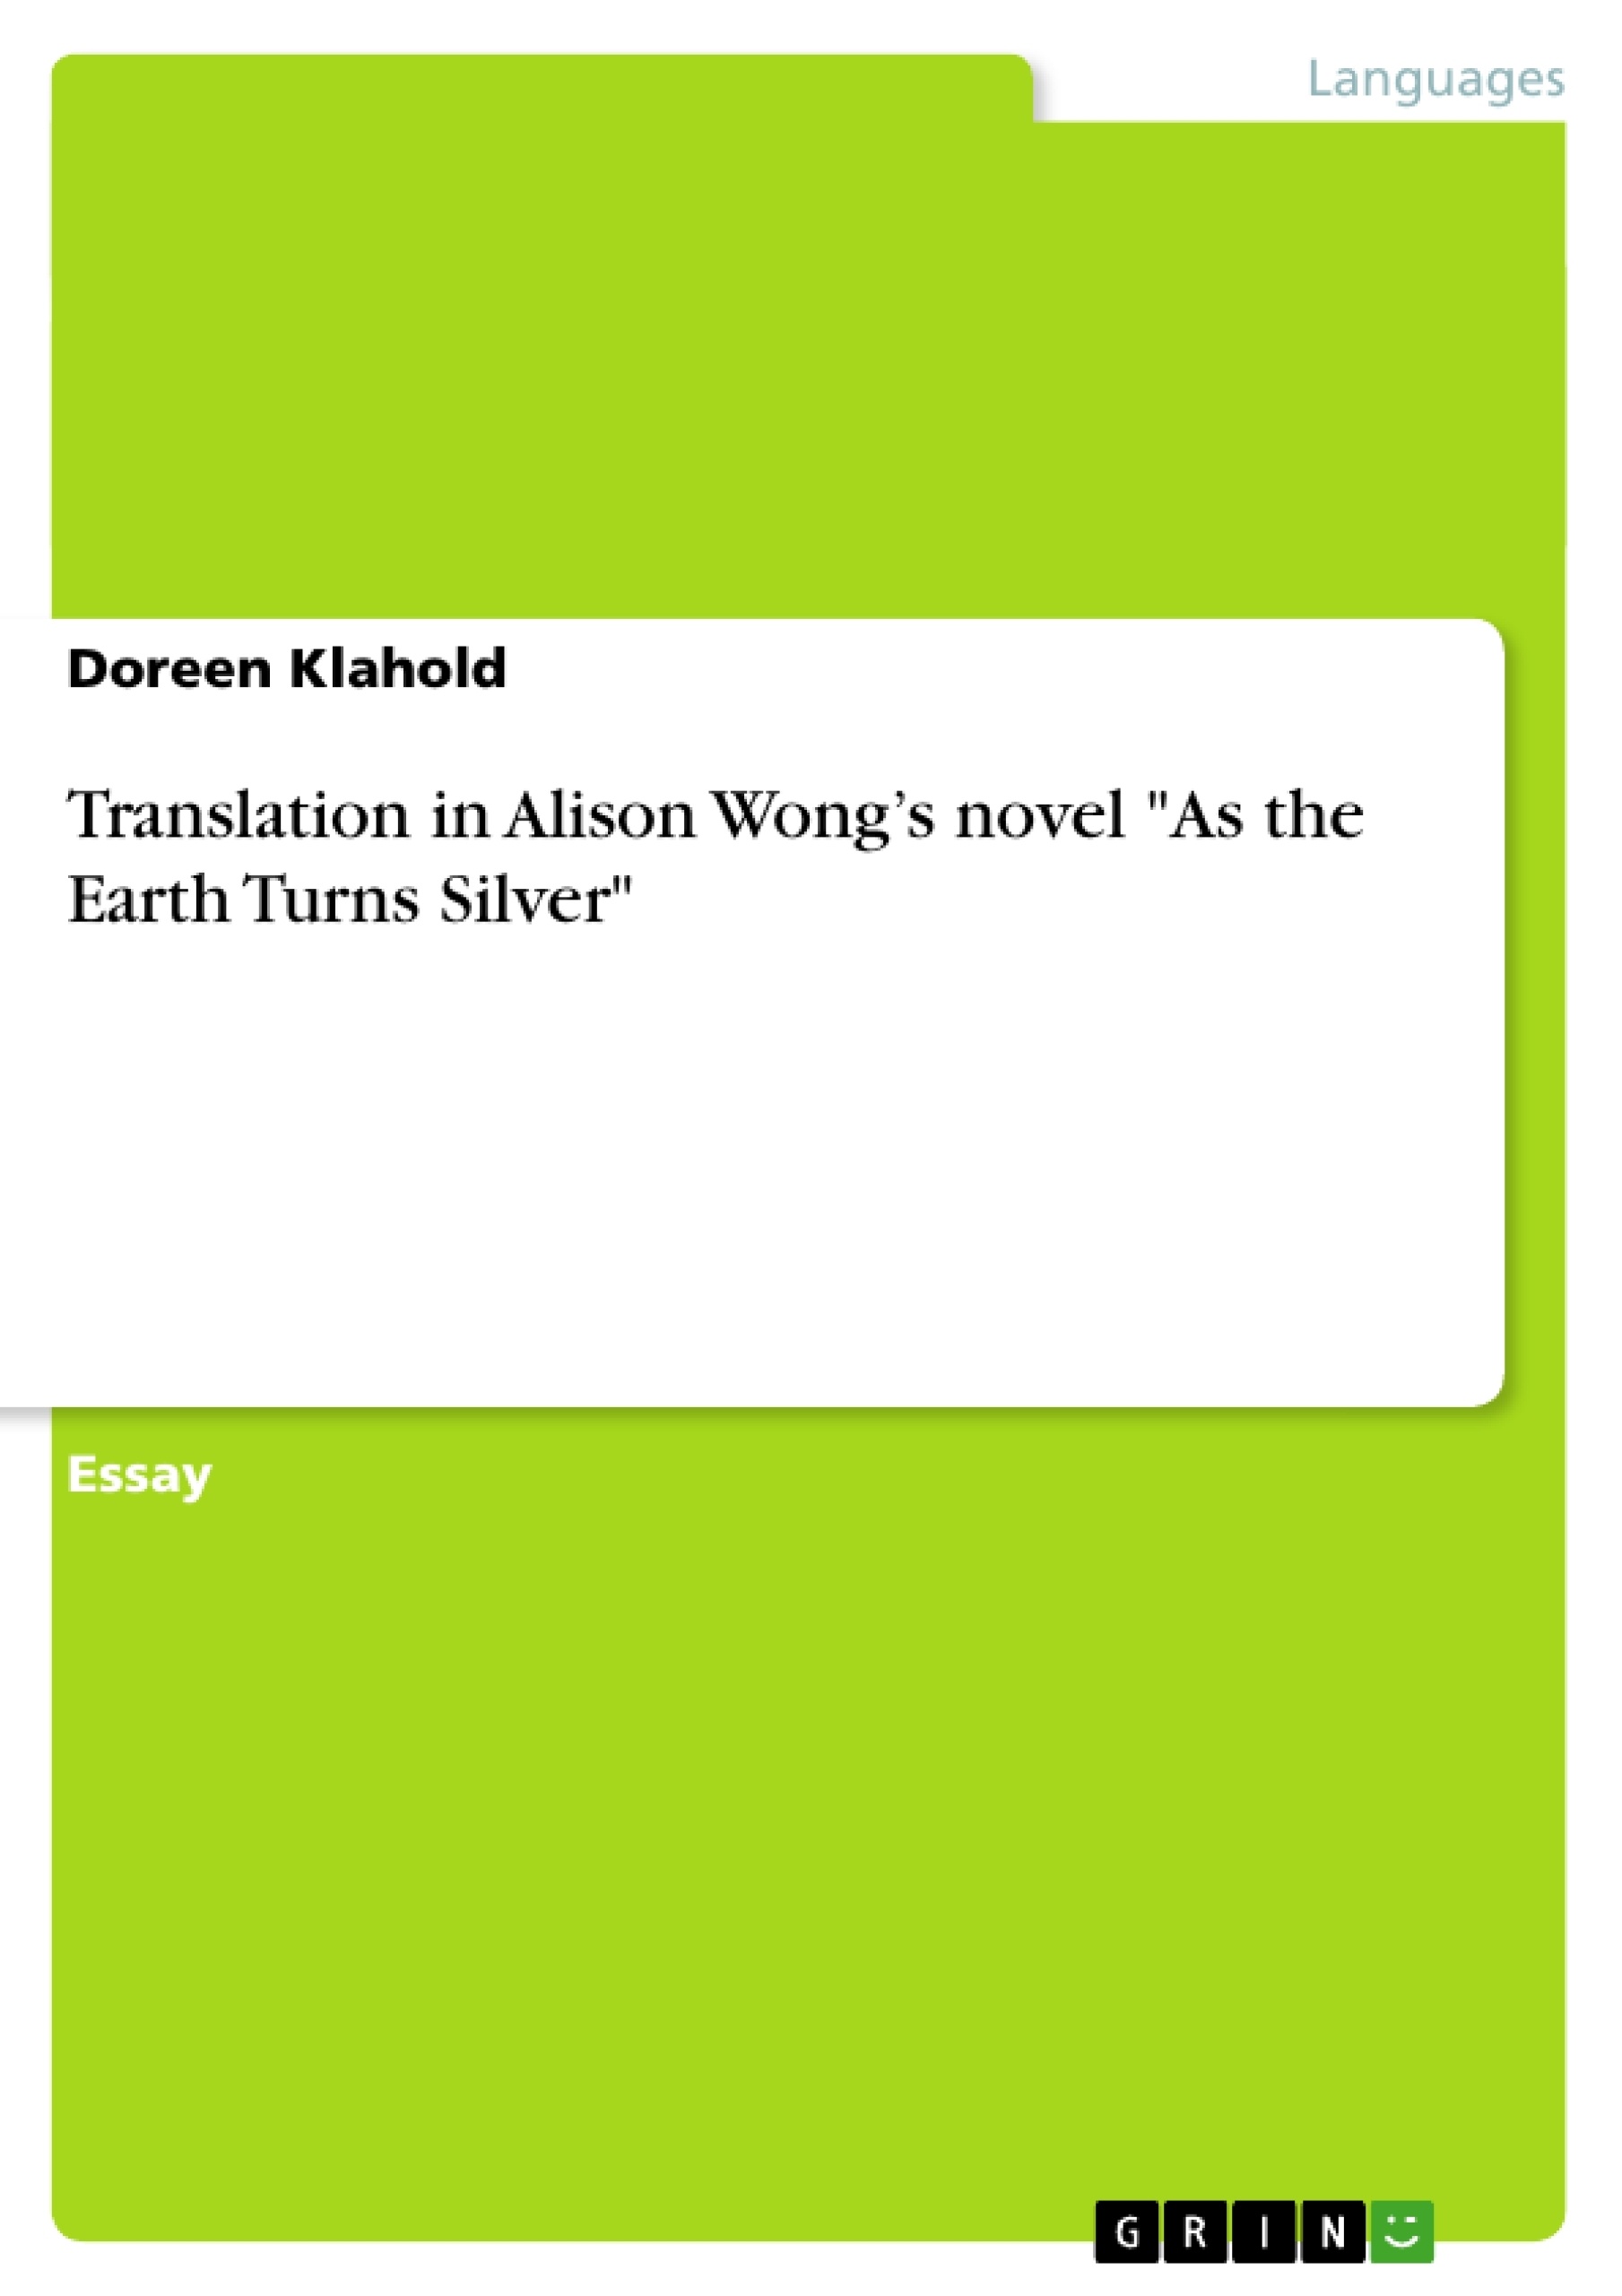 Title: Translation in Alison Wong’s novel "As the Earth Turns Silver"